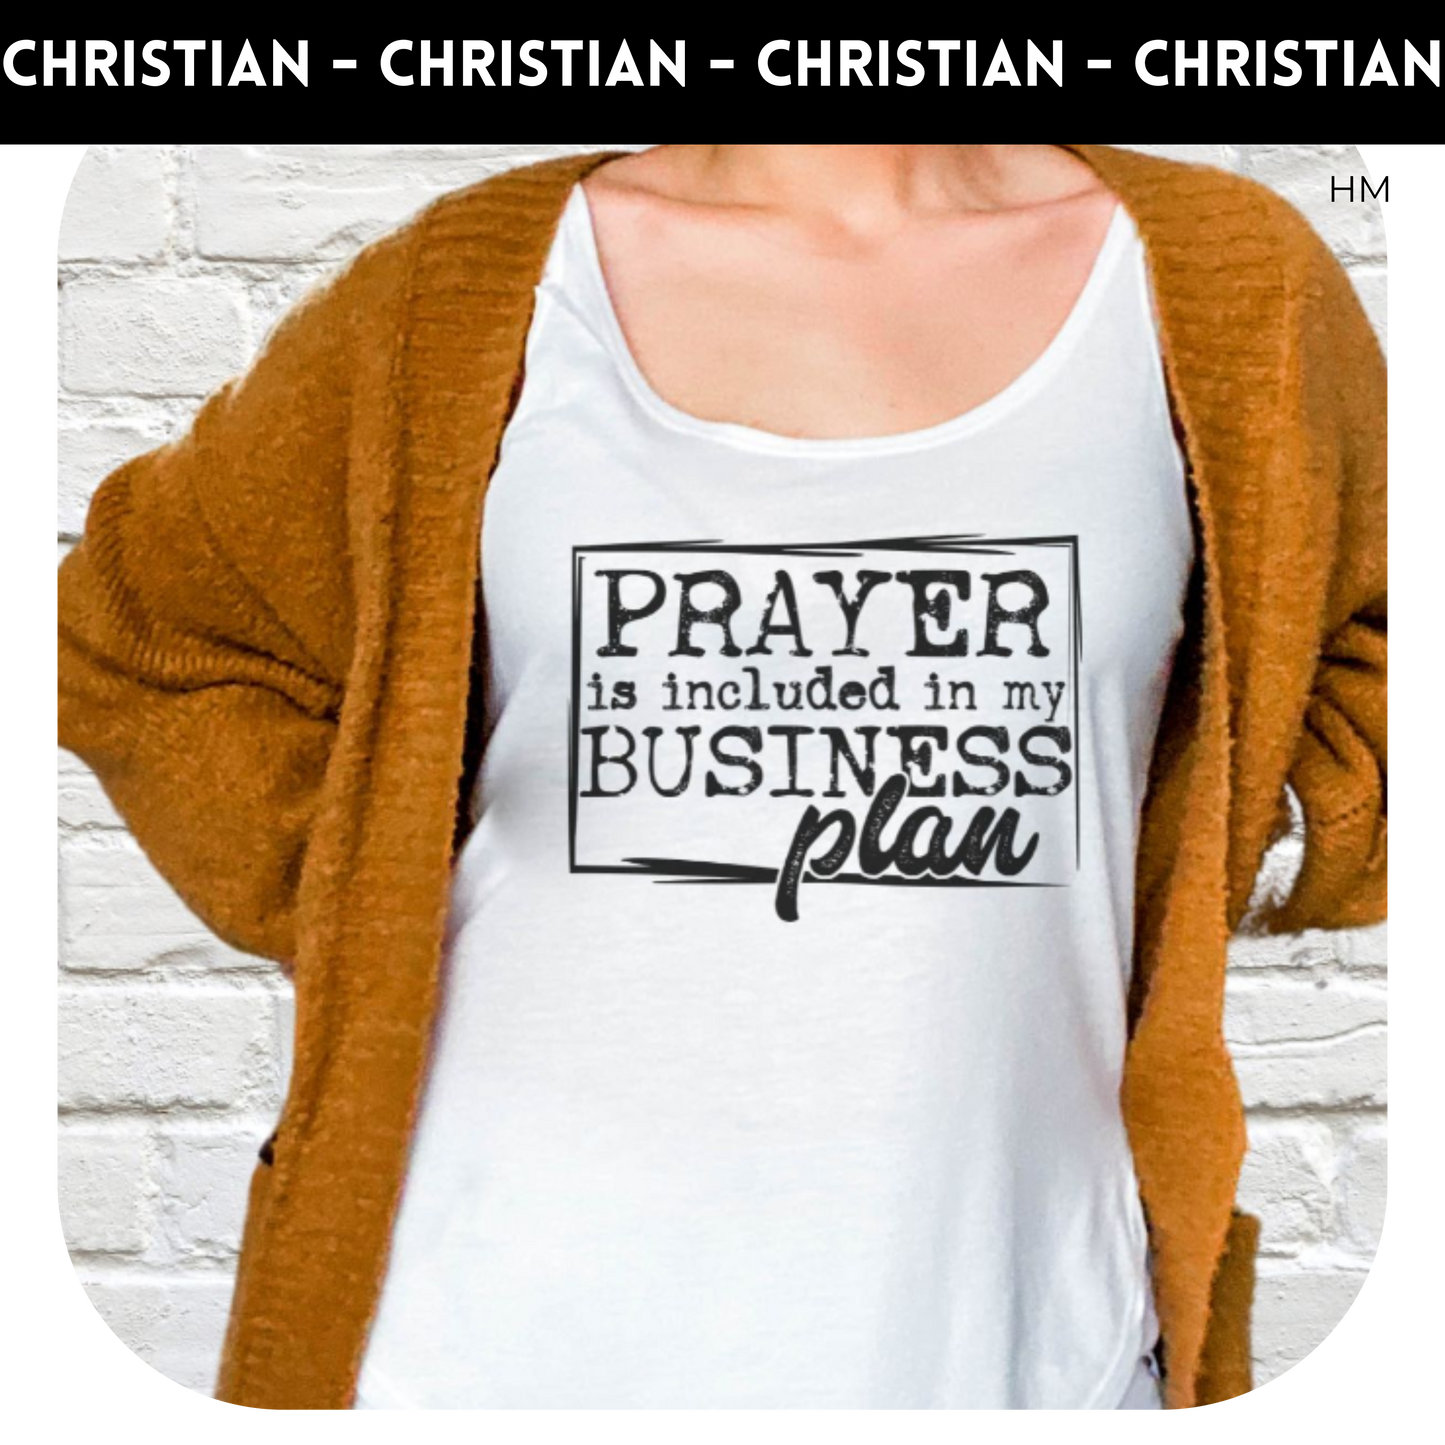 Prayer is included in my business plan